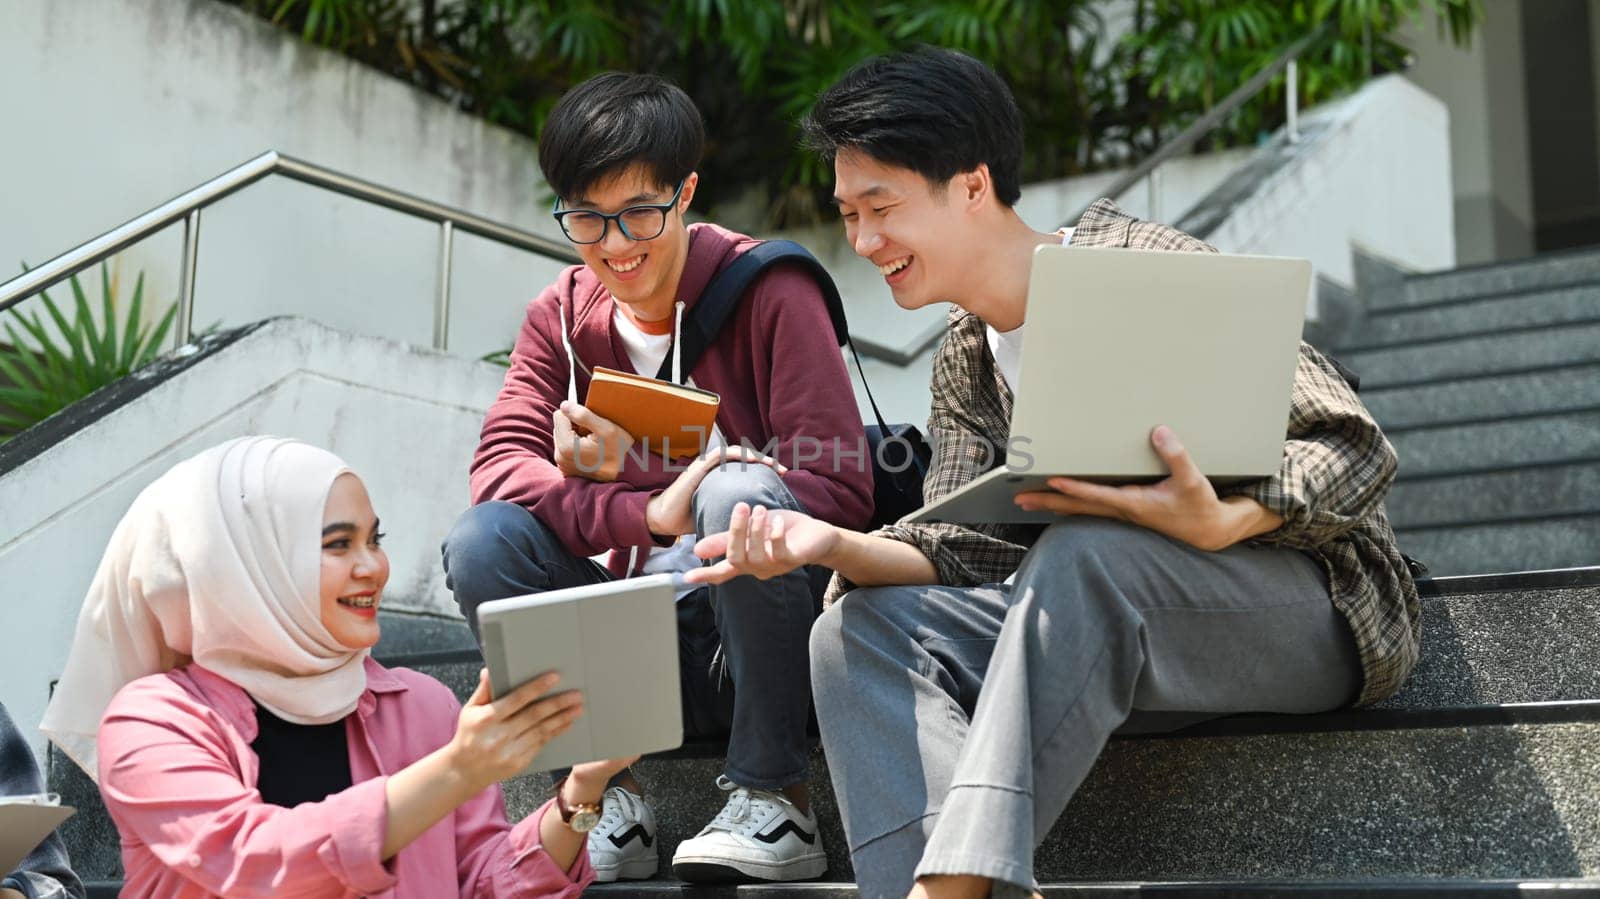 Happy students are sitting on college stairs and discussing their home assignment. Youth lifestyle and education concept.